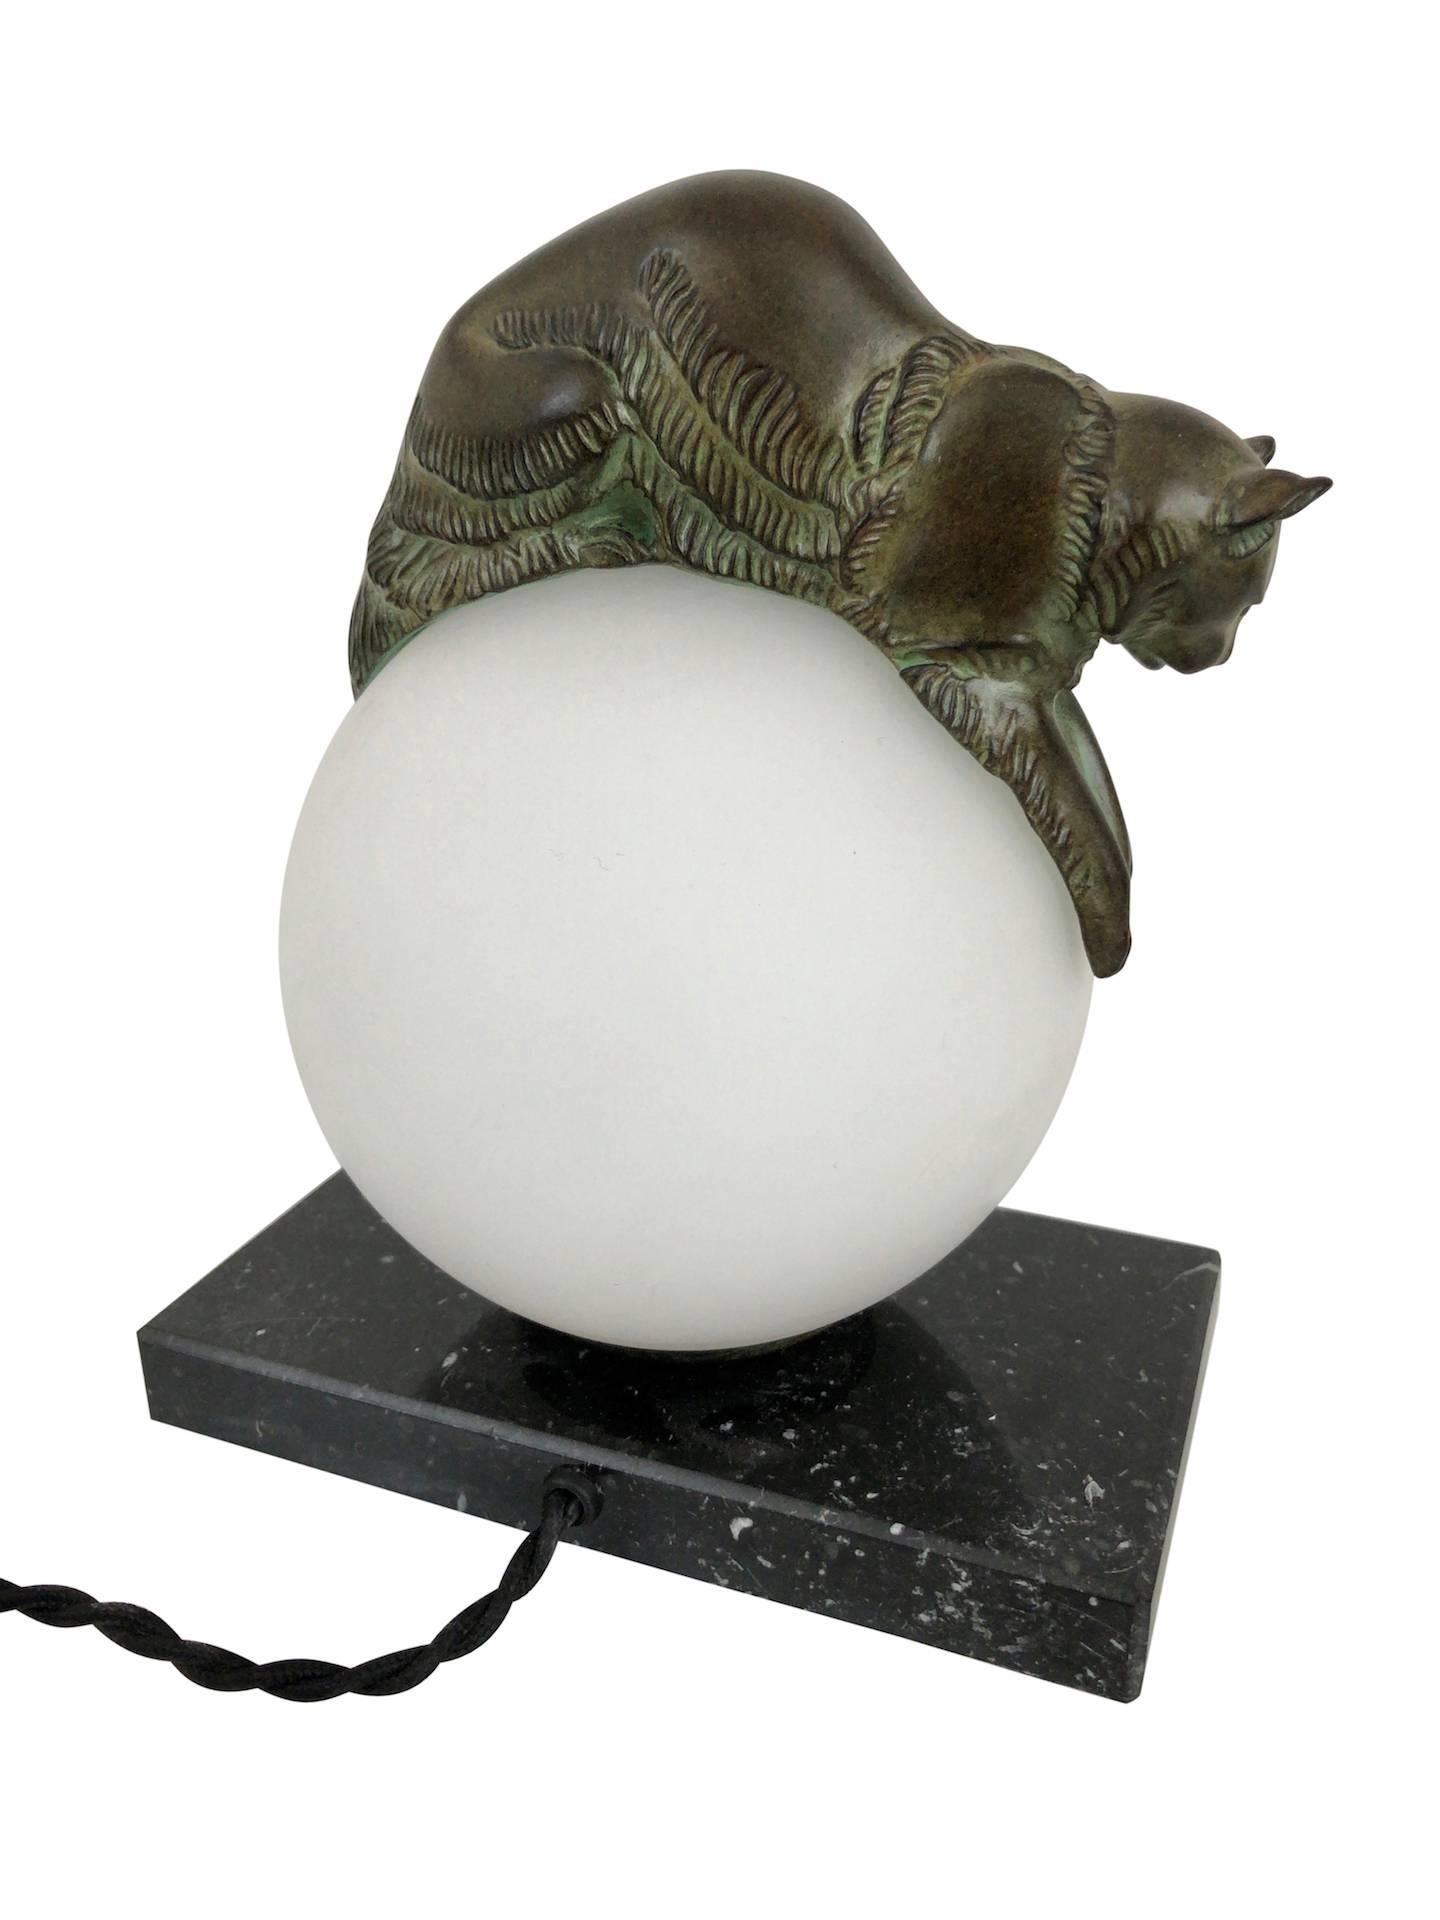 Contemporary French Table Lamp Equilibre a Cat on a Glass Ball by Gaillard for Max Le Verrier